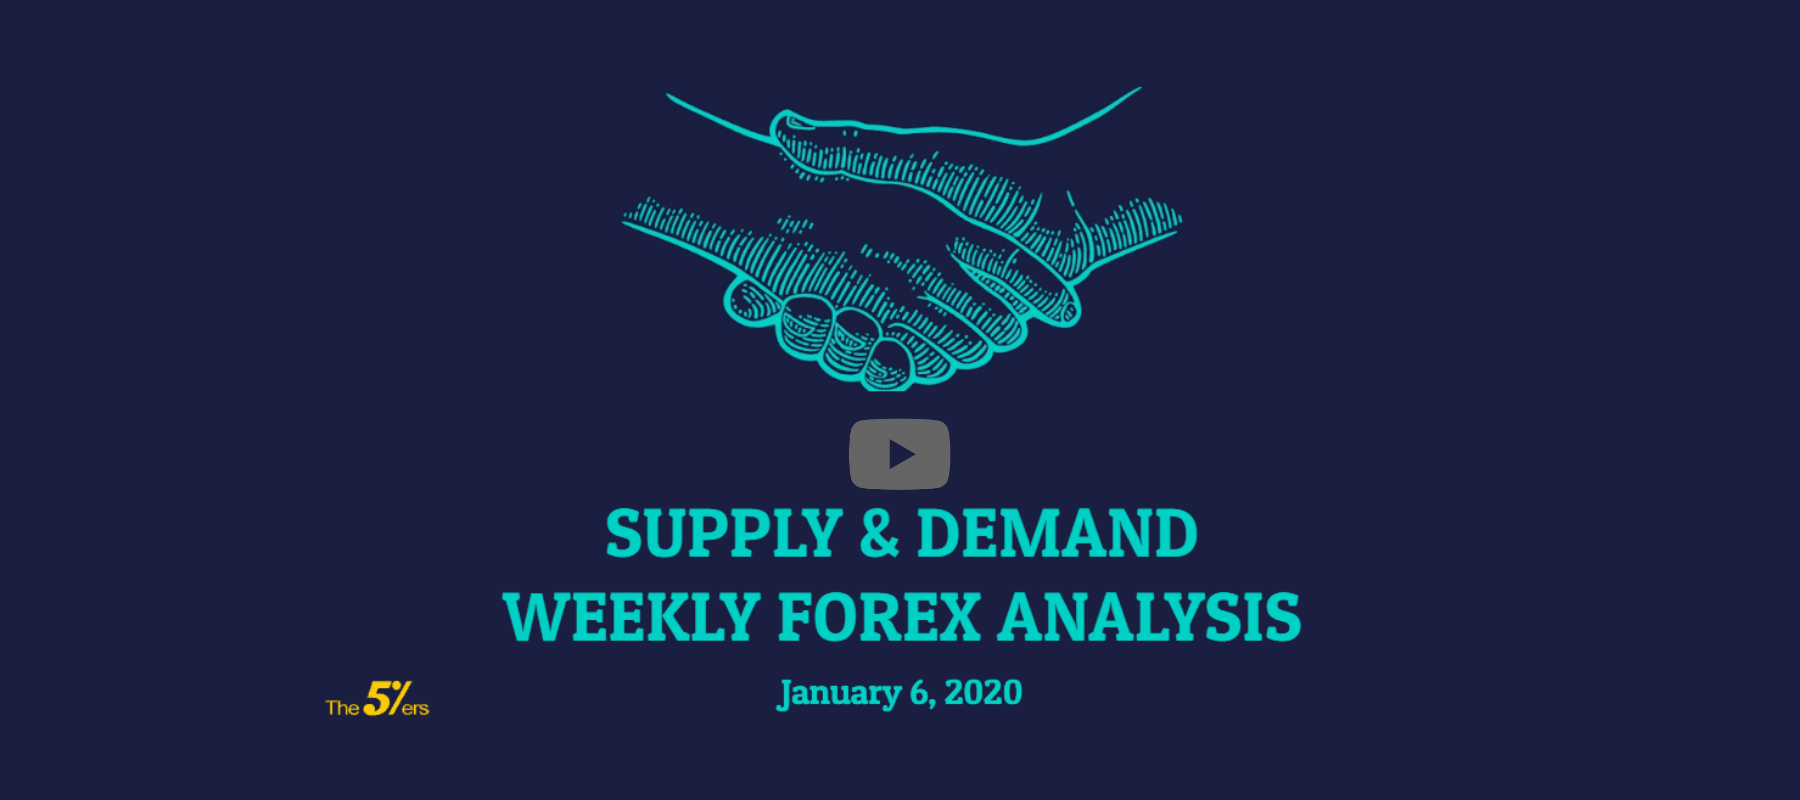 Weekly Forex Analysis – Supply & Demand Forex strategy January 6, 2019